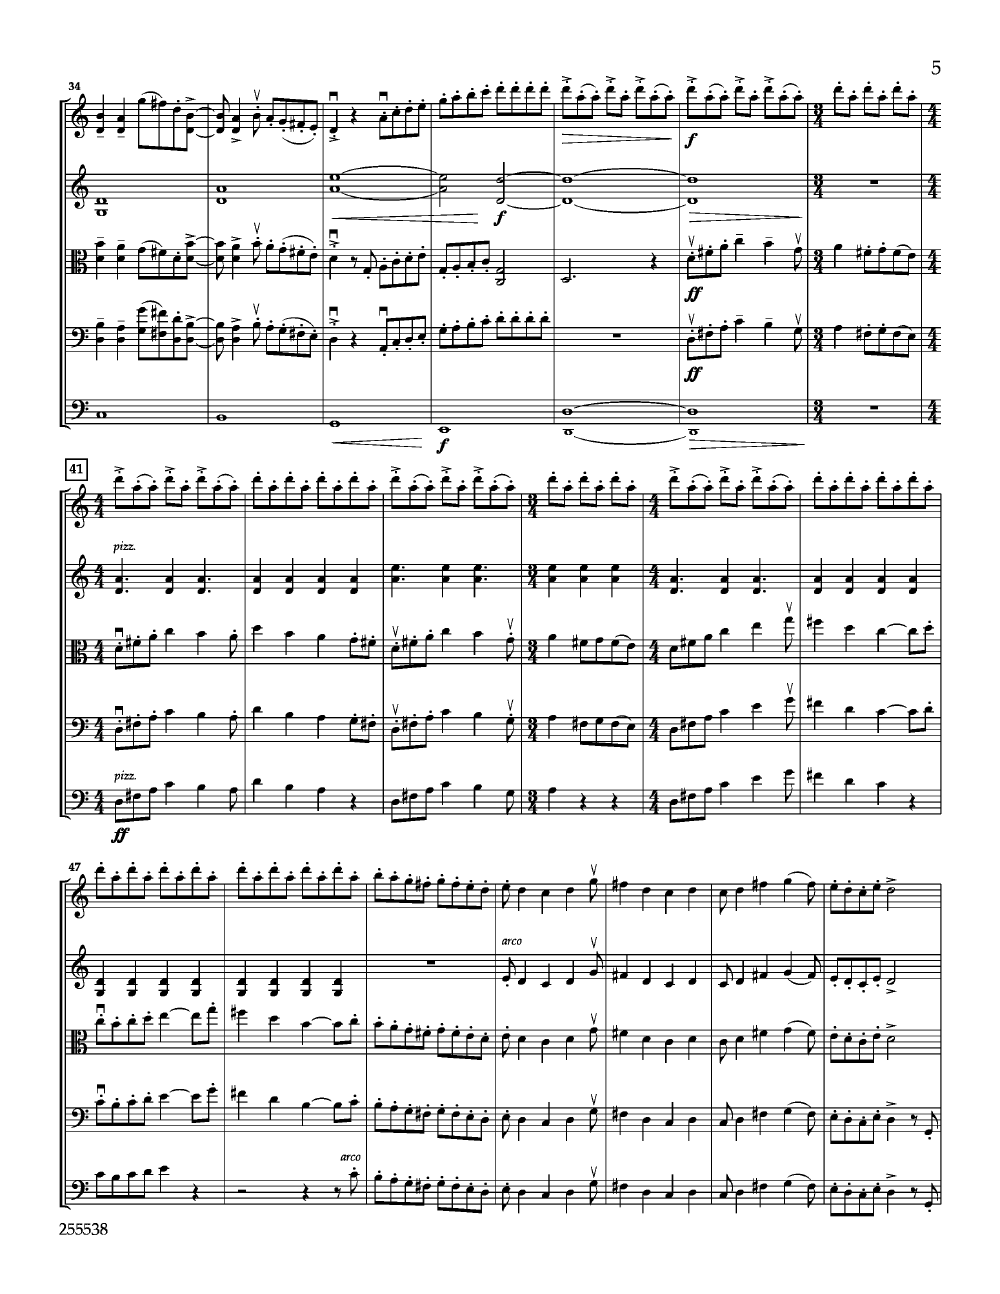 AMERICAN SKETCHES  FANTASY FOR STRING ORCHESTRA SCORE